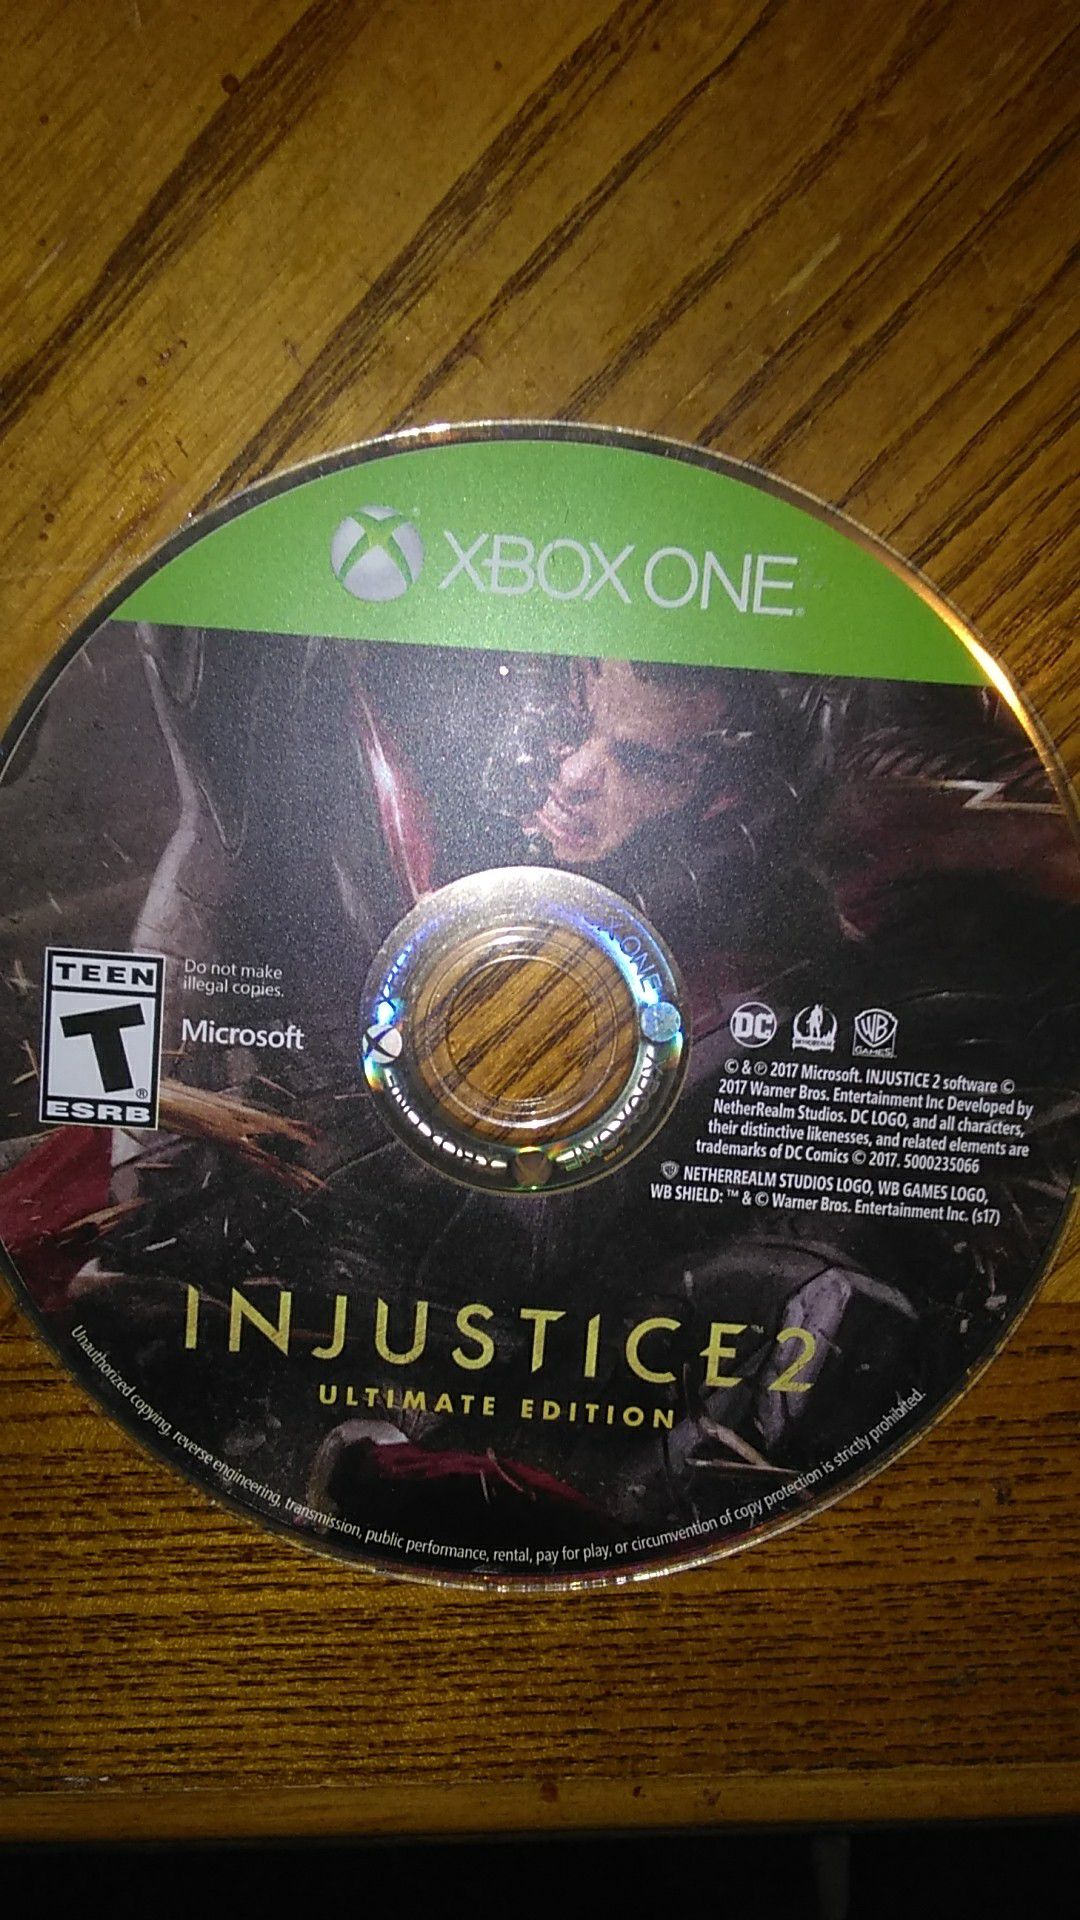 INJUSTICE 2 ULTIMATE EDITION (XBOX ONE)